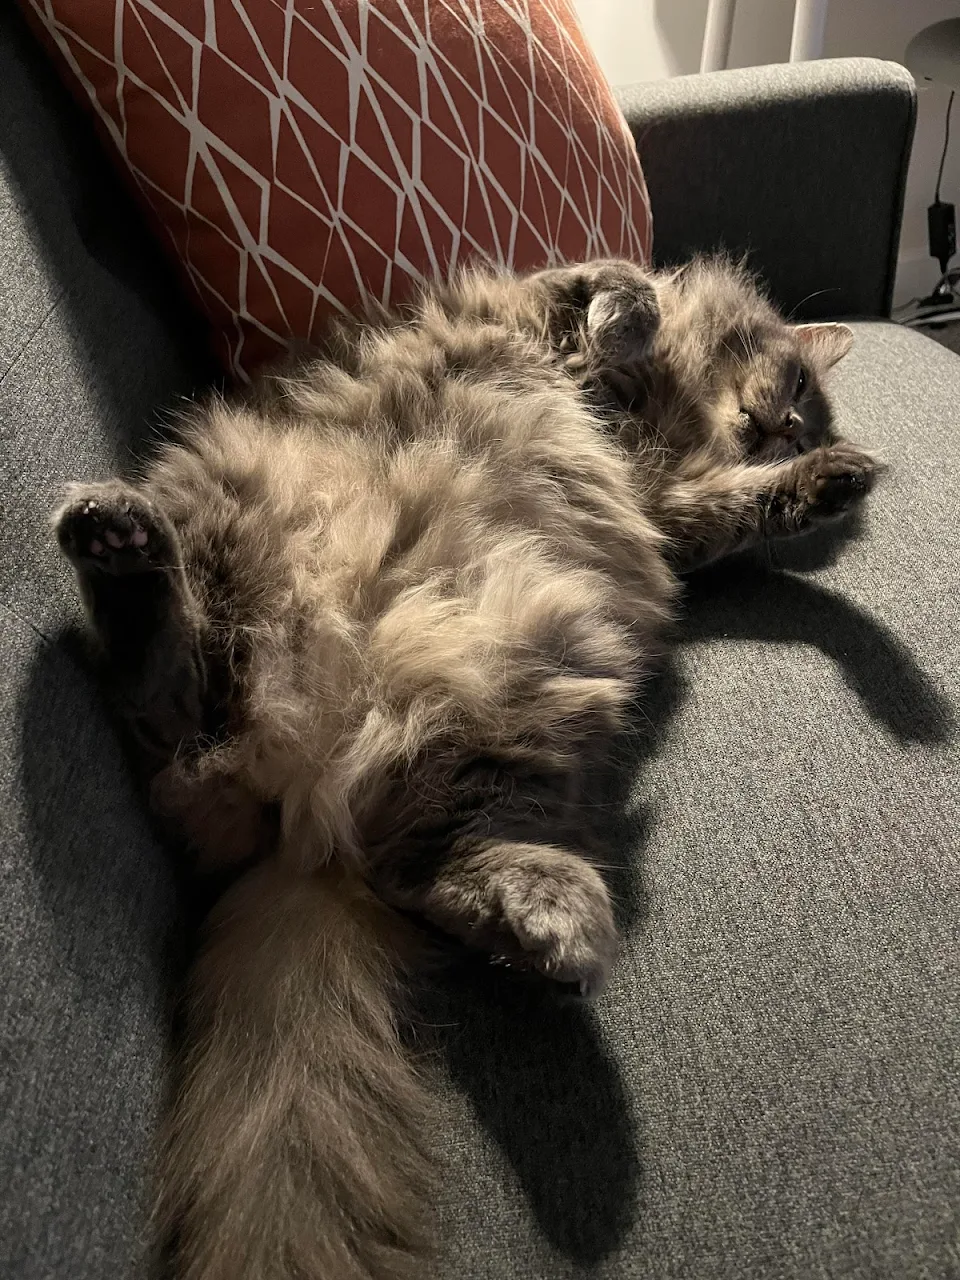 I’m 98% sure it’s a trap but I’m still compelled to ruffle my guy’s floofy belly, wish me luck